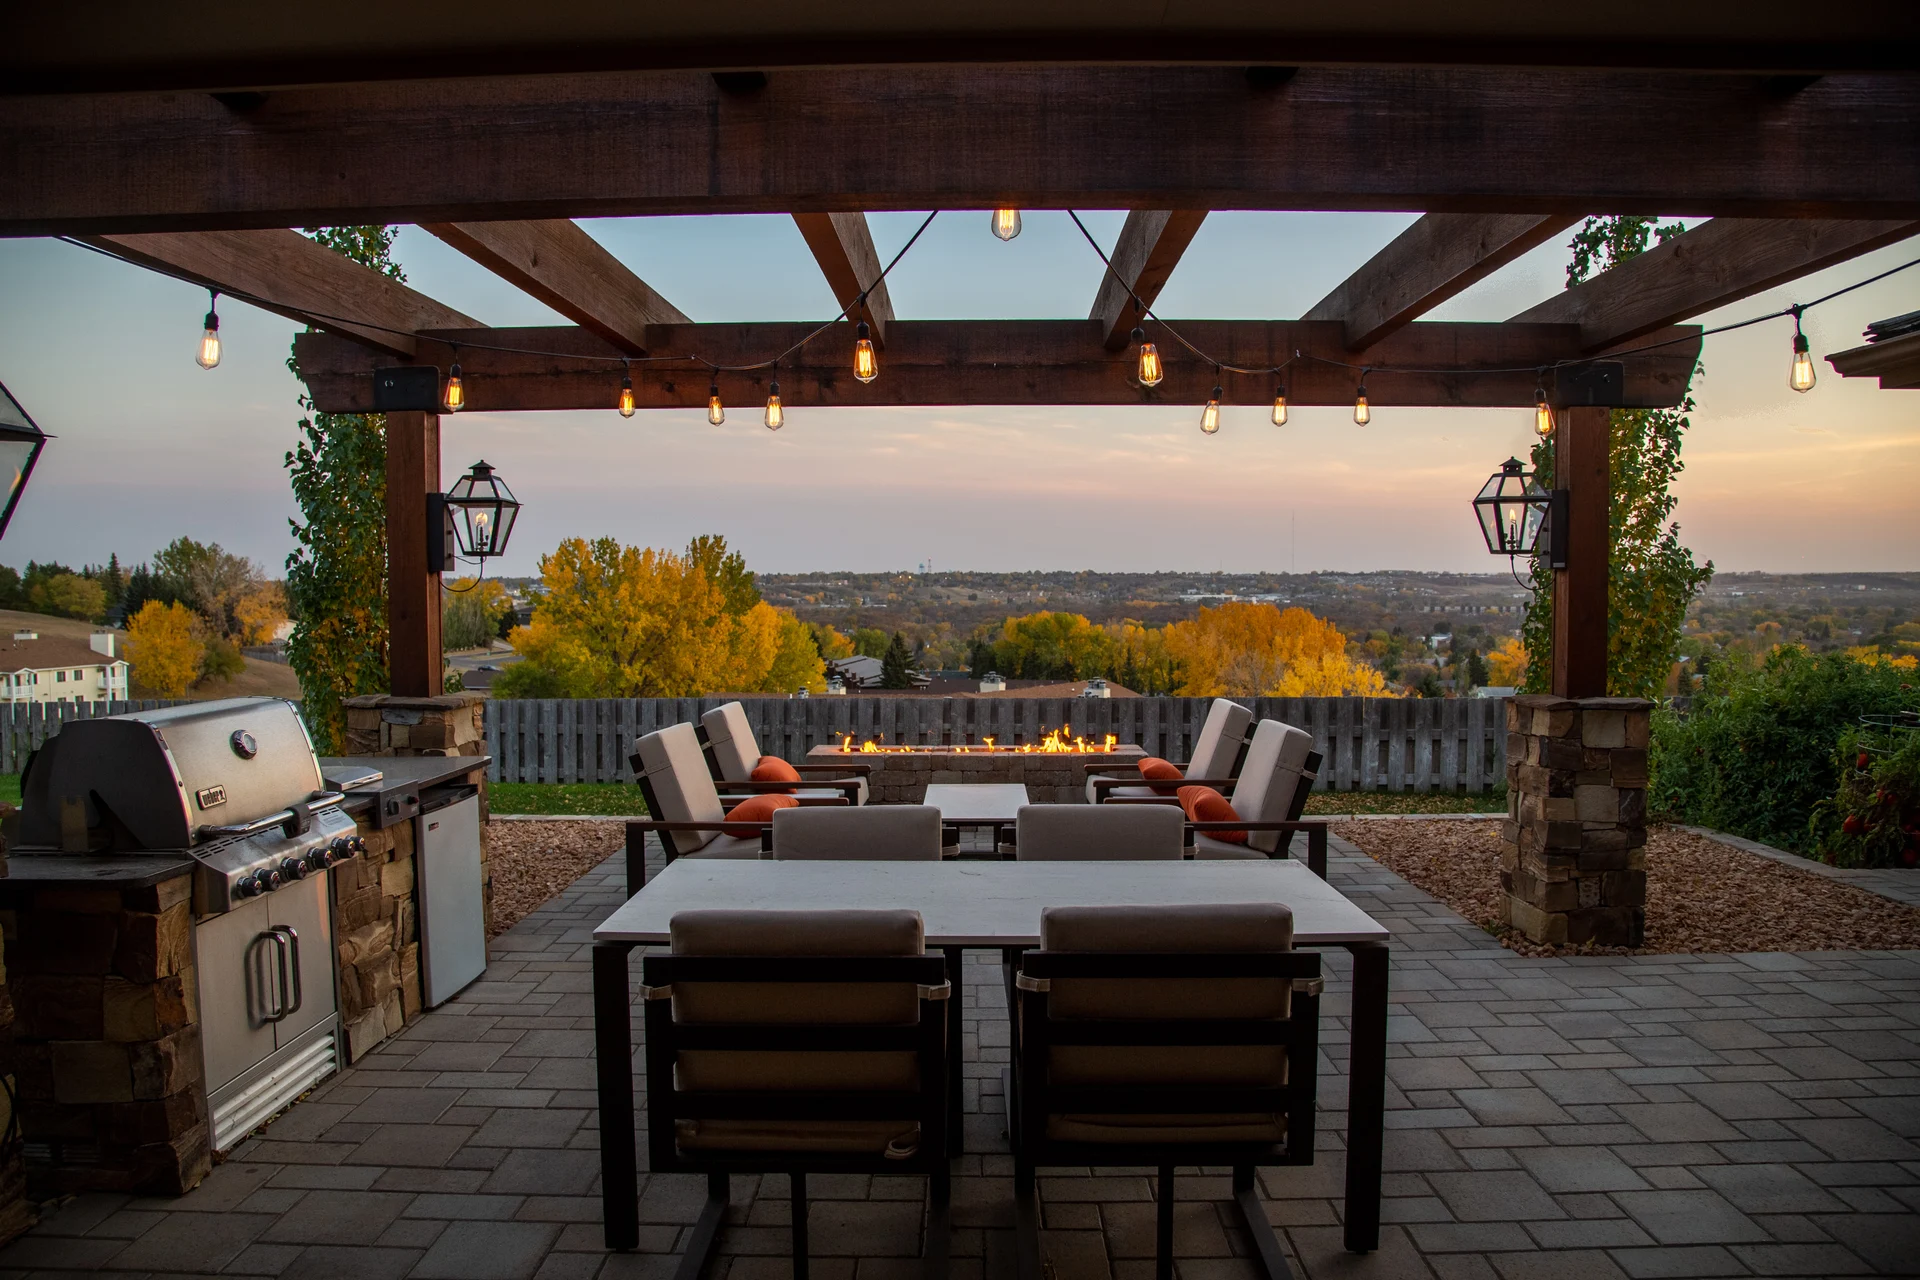 How to Turn Your Patio or Yard into the Perfect Outdoor Dining Area